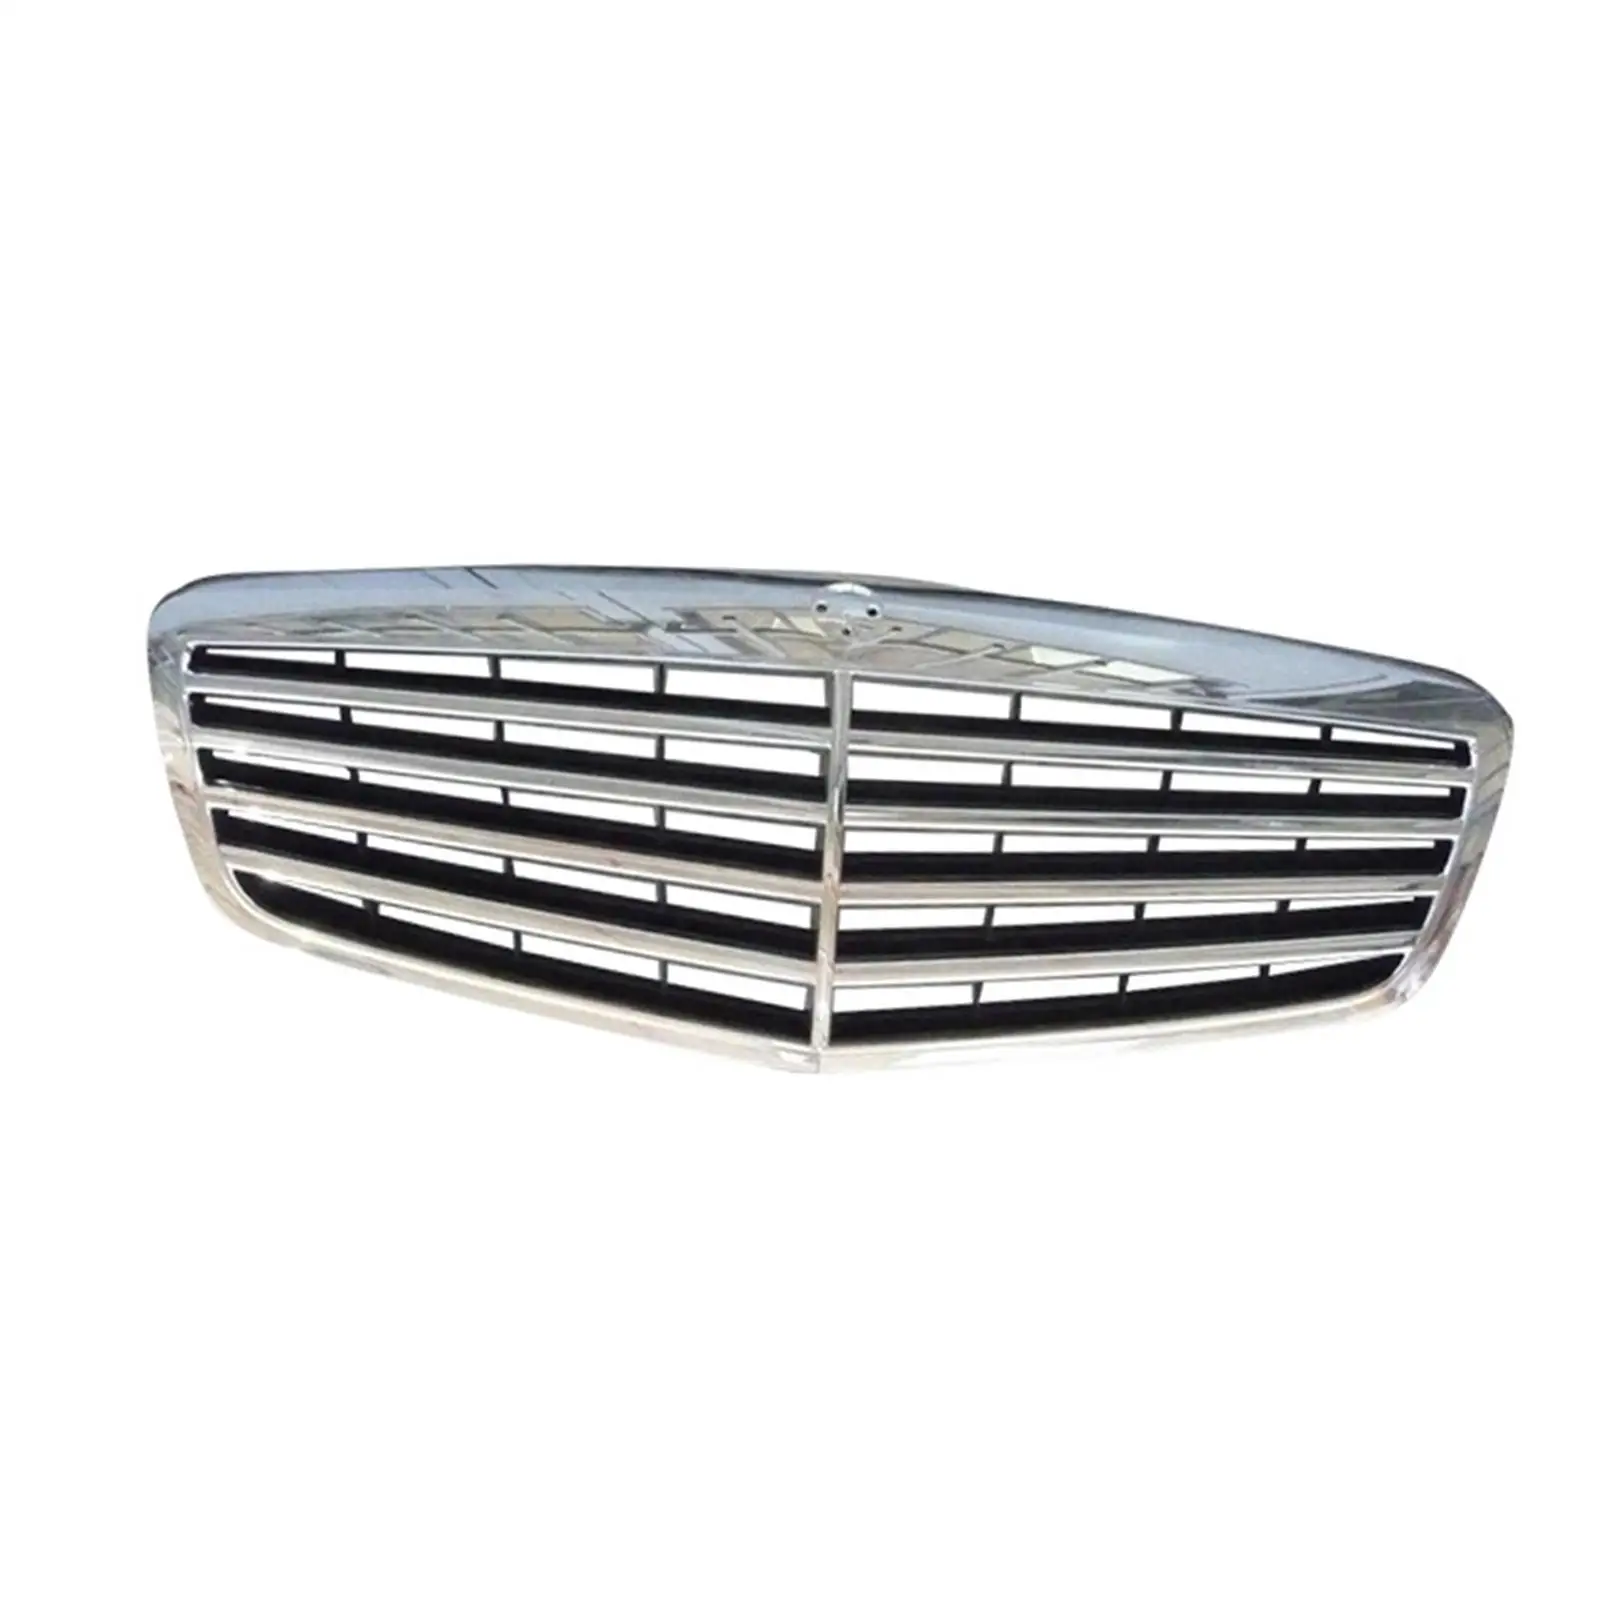 Front Grille Grill 2218800483 Mesh Vent Hole Hood Trims Durable Replace for Mercedes-benz S Class W221 2010-2013